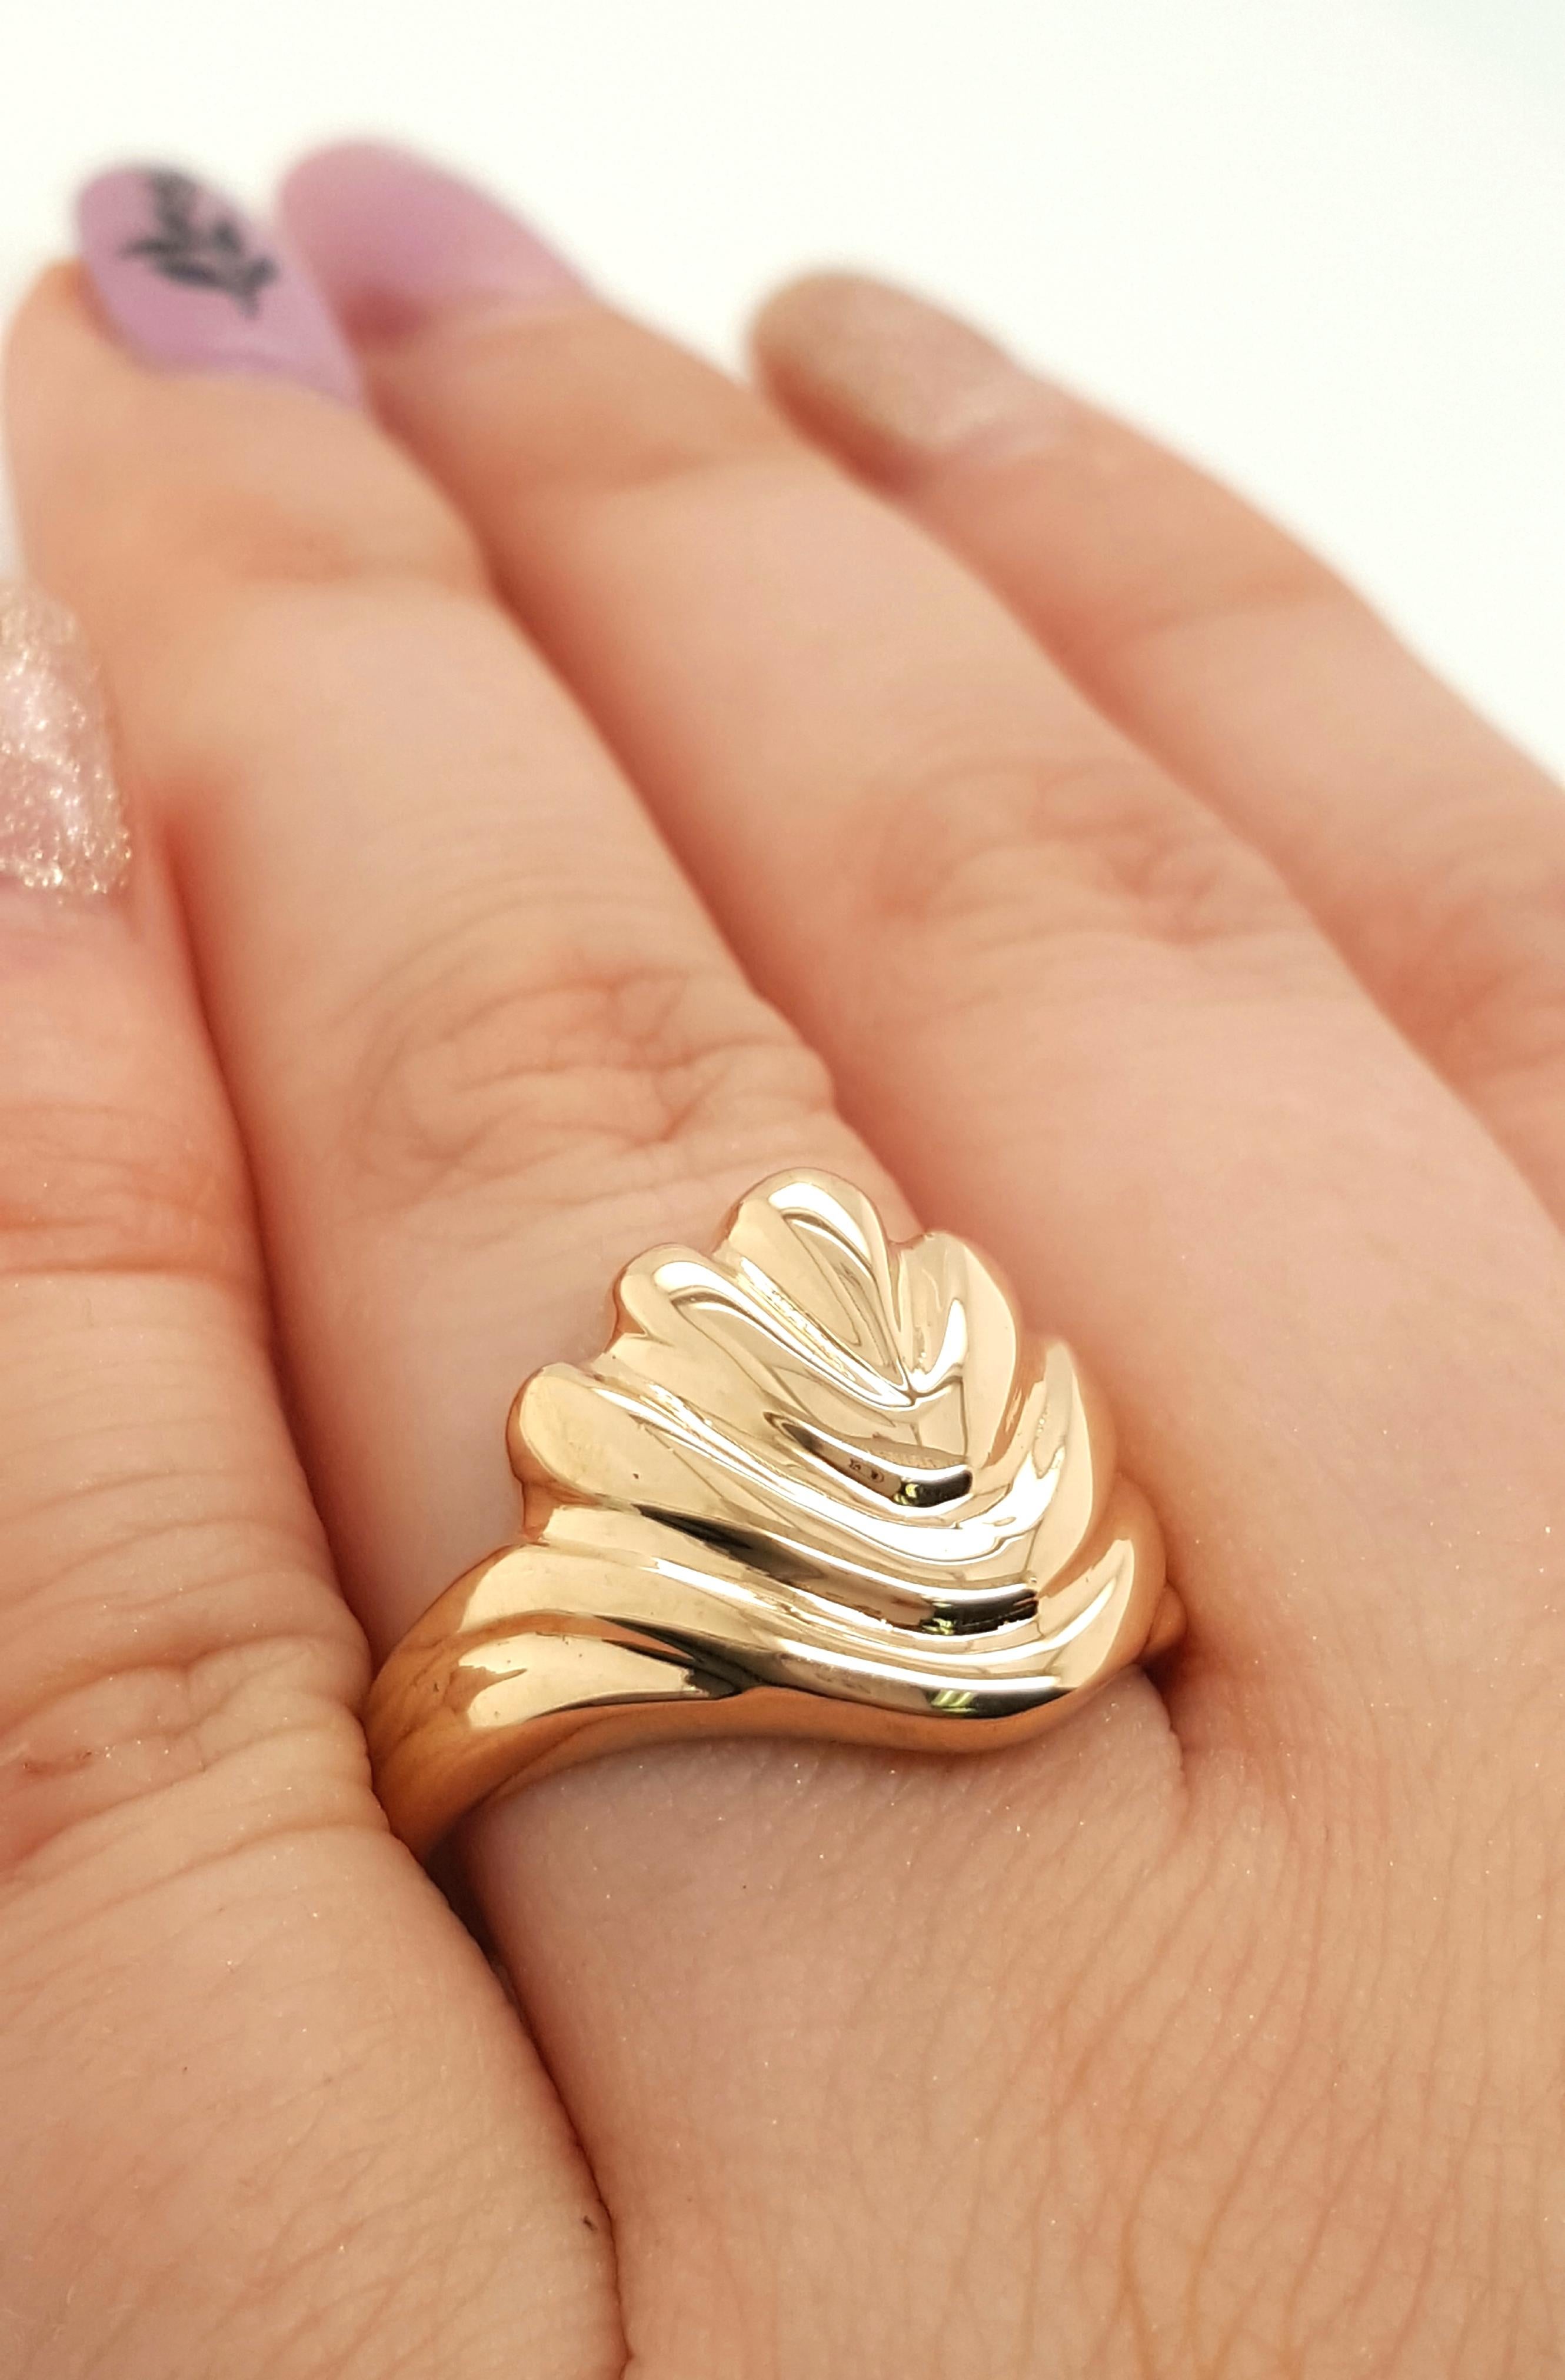 Description: 
This piece is a 14k yellow gold beauty of a fluted ring!

Item Details: 
Ring Size: 8.5
Metal Type: 14k Yellow Gold
Weight: 5.7 grams
Hallmark: 14k
Engraving: none
Width: 15.8 mm
Finger to Top of Ring Measurement: 3.4 mm
